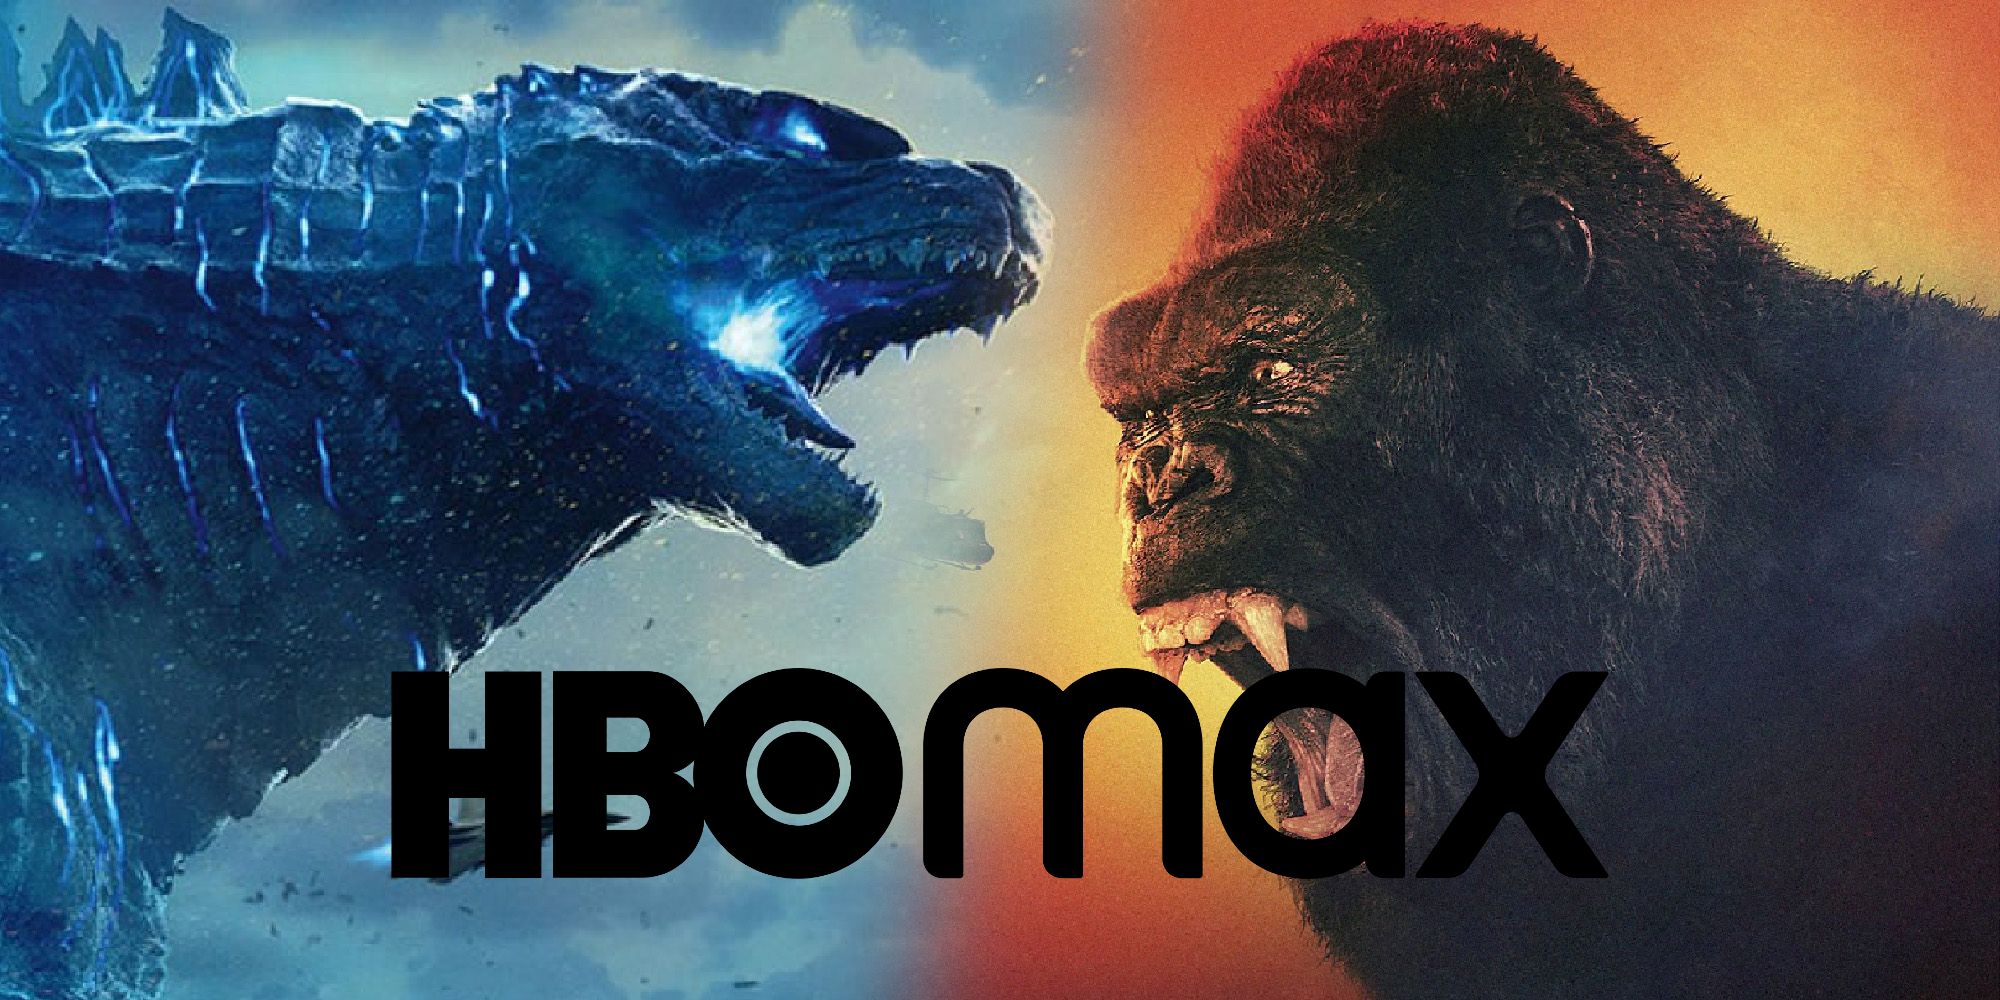 Warner Bros. 2021 Movies Will Only Be Available For A Month On HBO Max